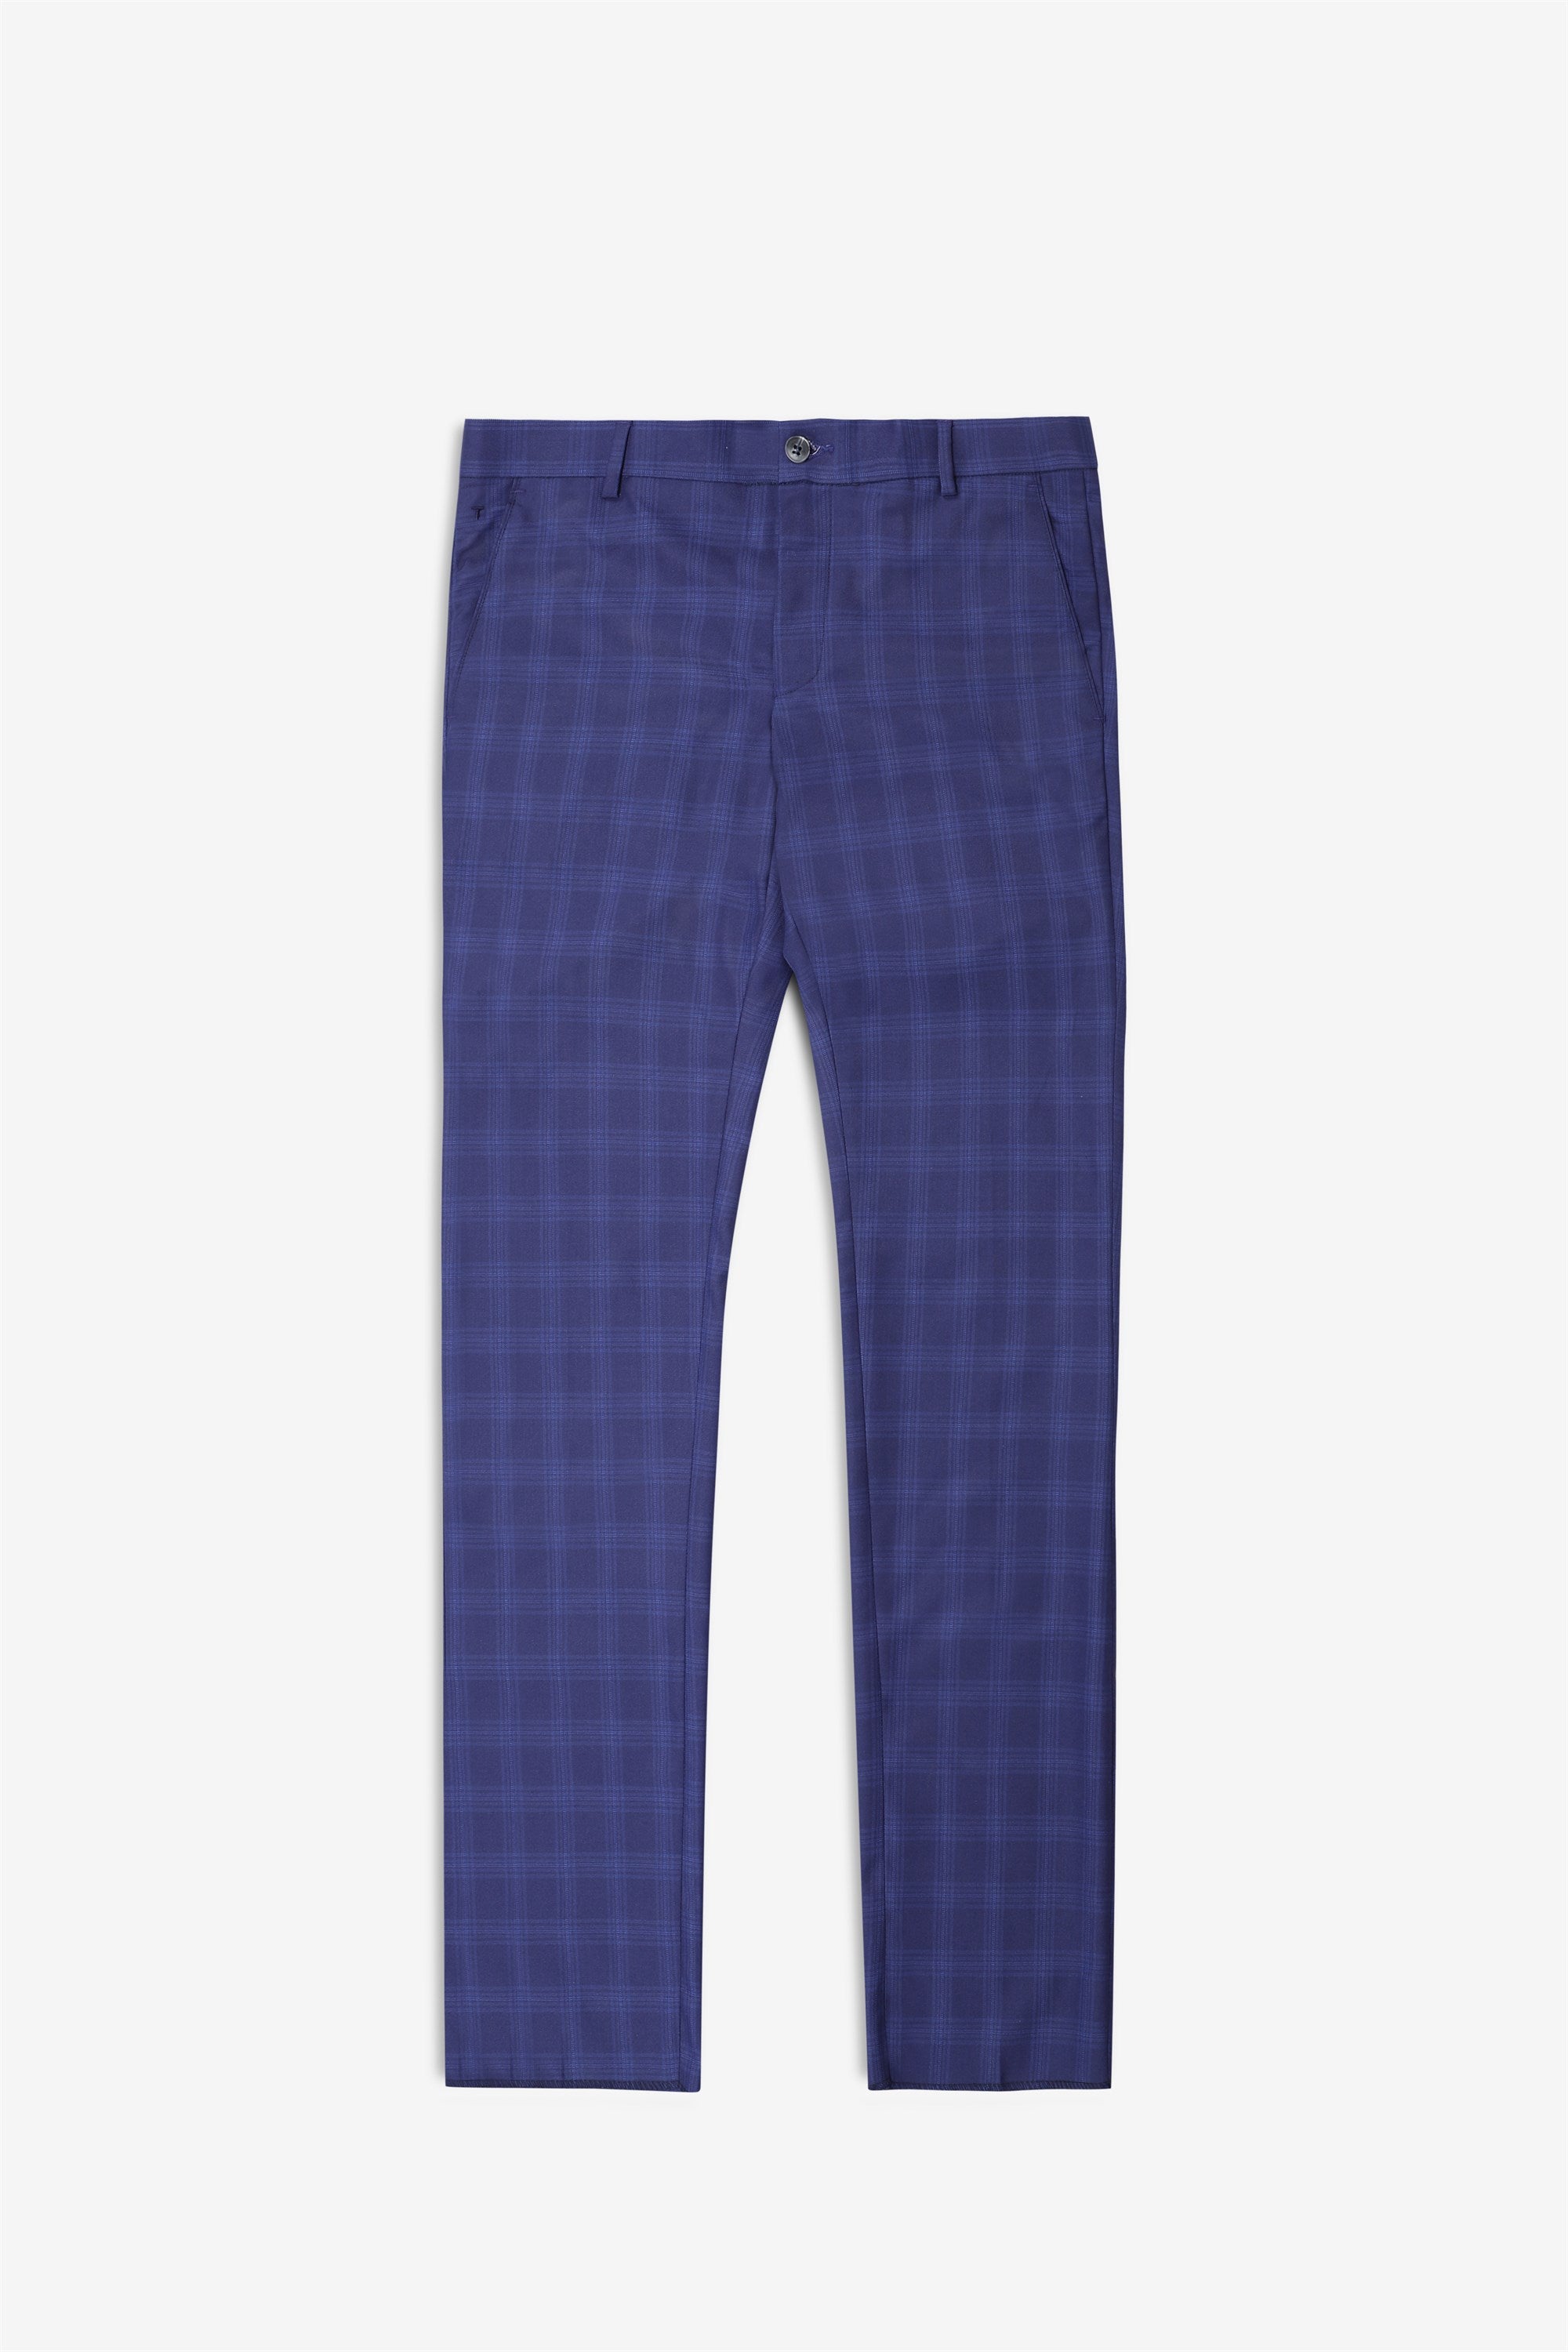 Buy Men Grey Check Carrot Fit Formal Trousers Online - 743878 | Peter  England